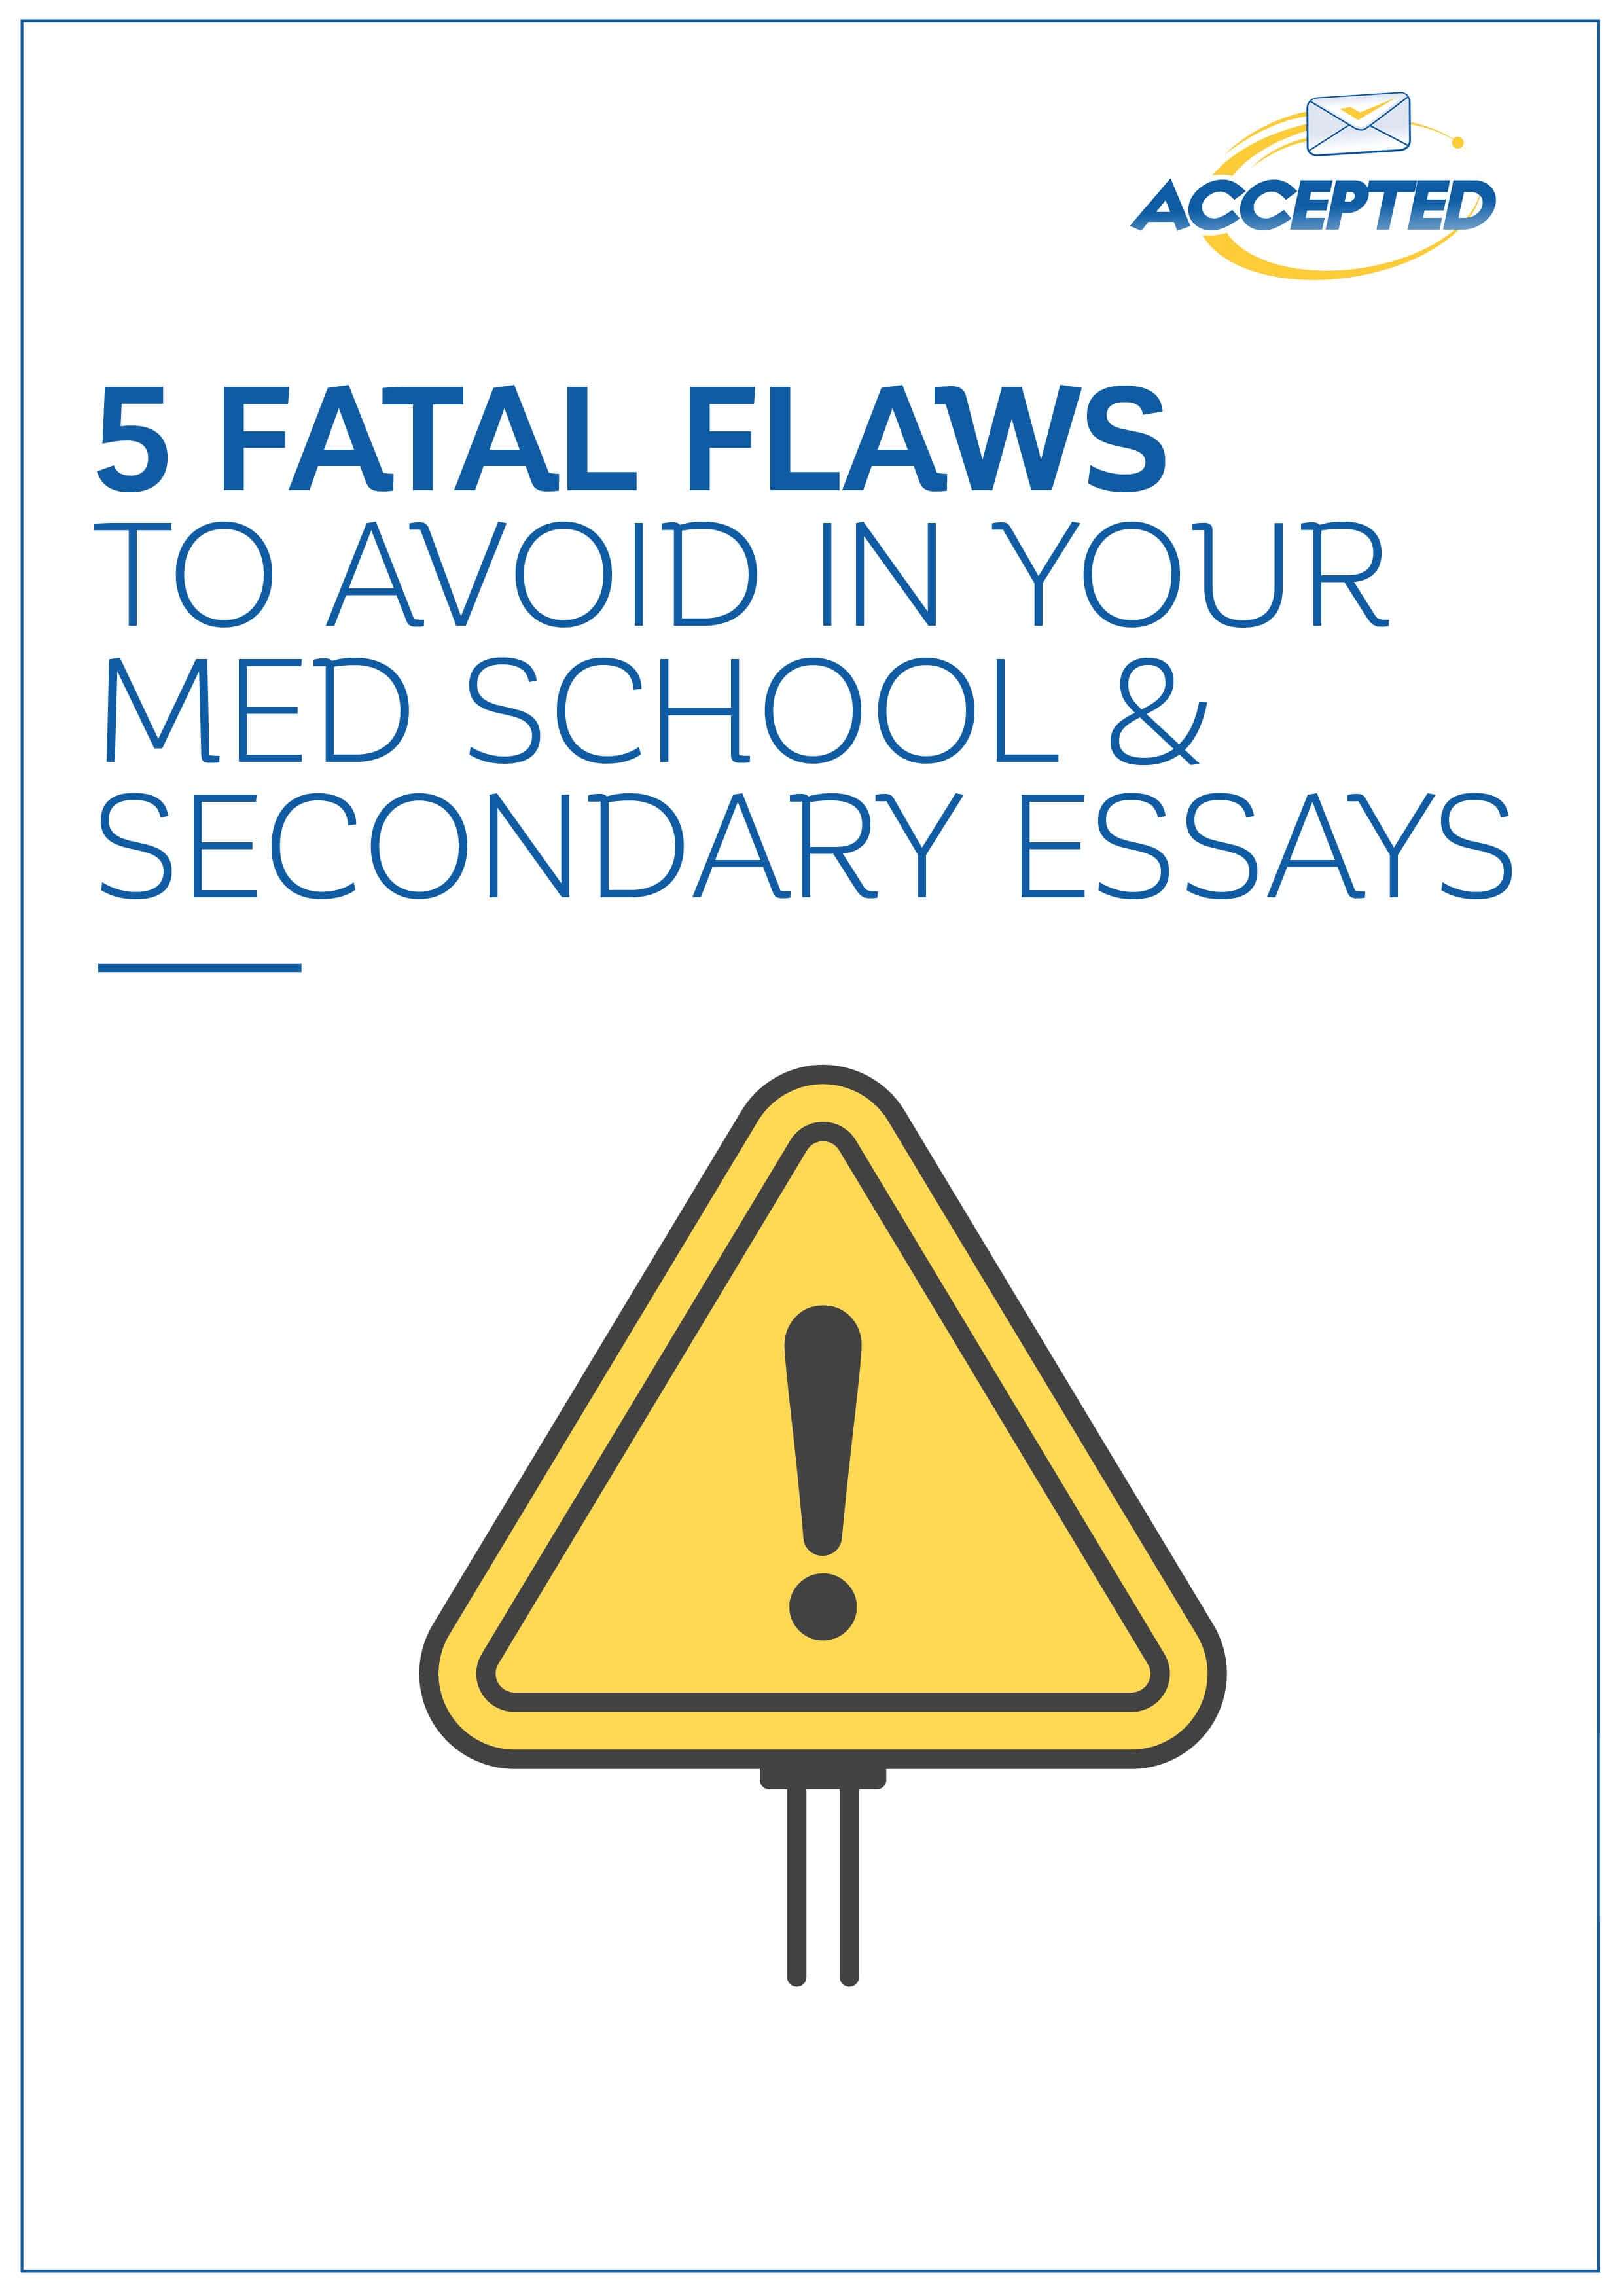 5 Fatal Flaws to Avoid in Your Med School Essays